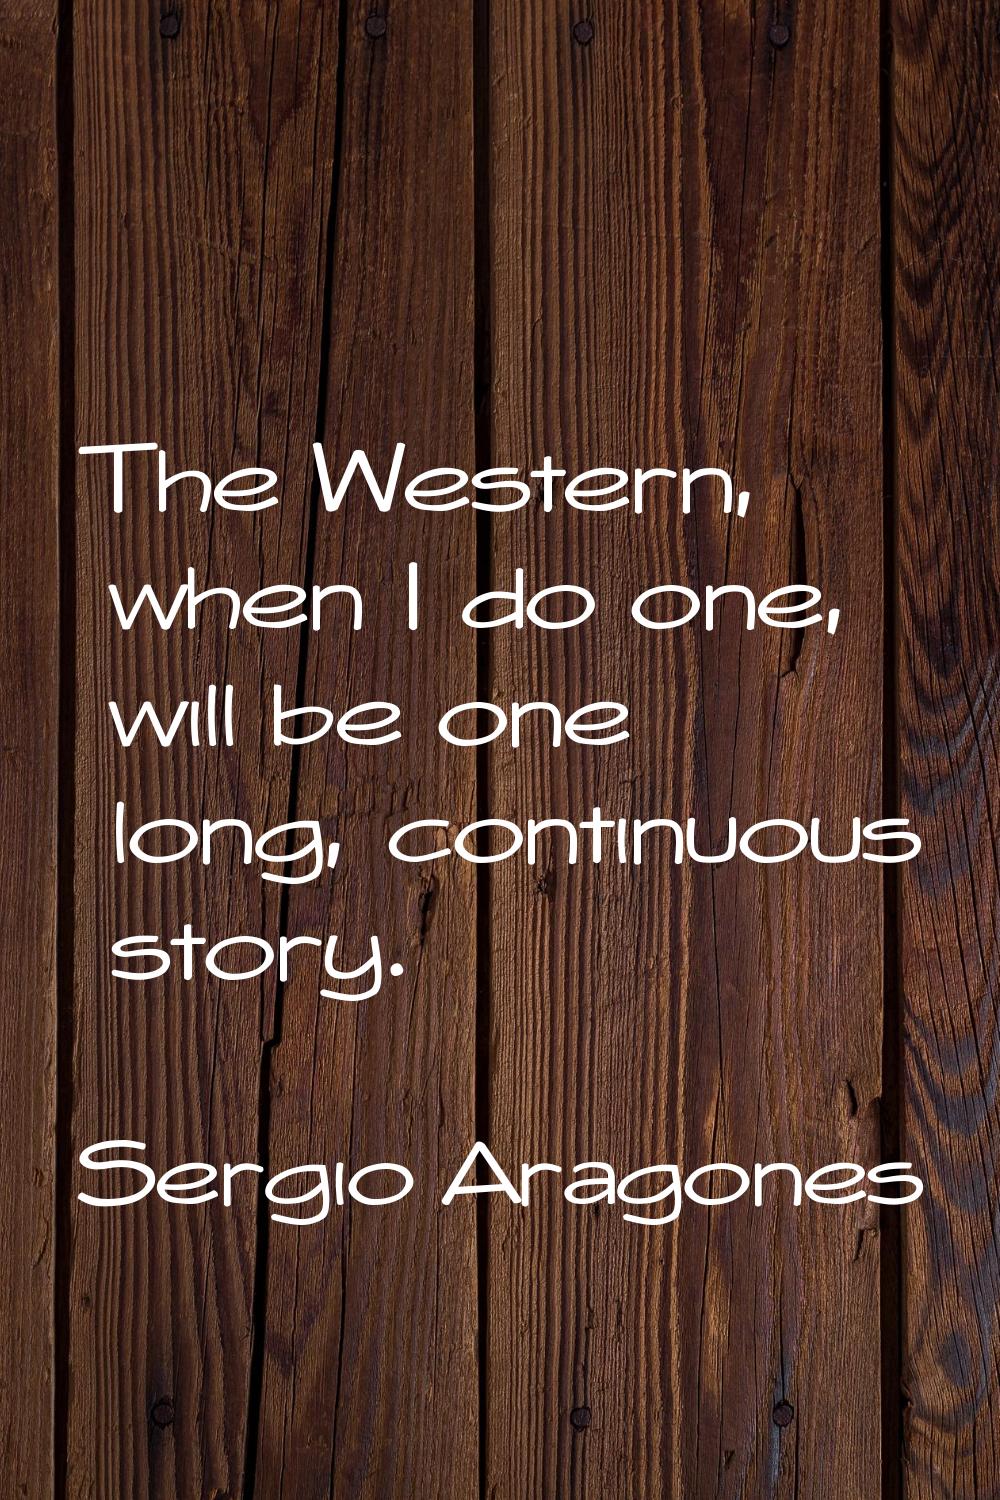 The Western, when I do one, will be one long, continuous story.